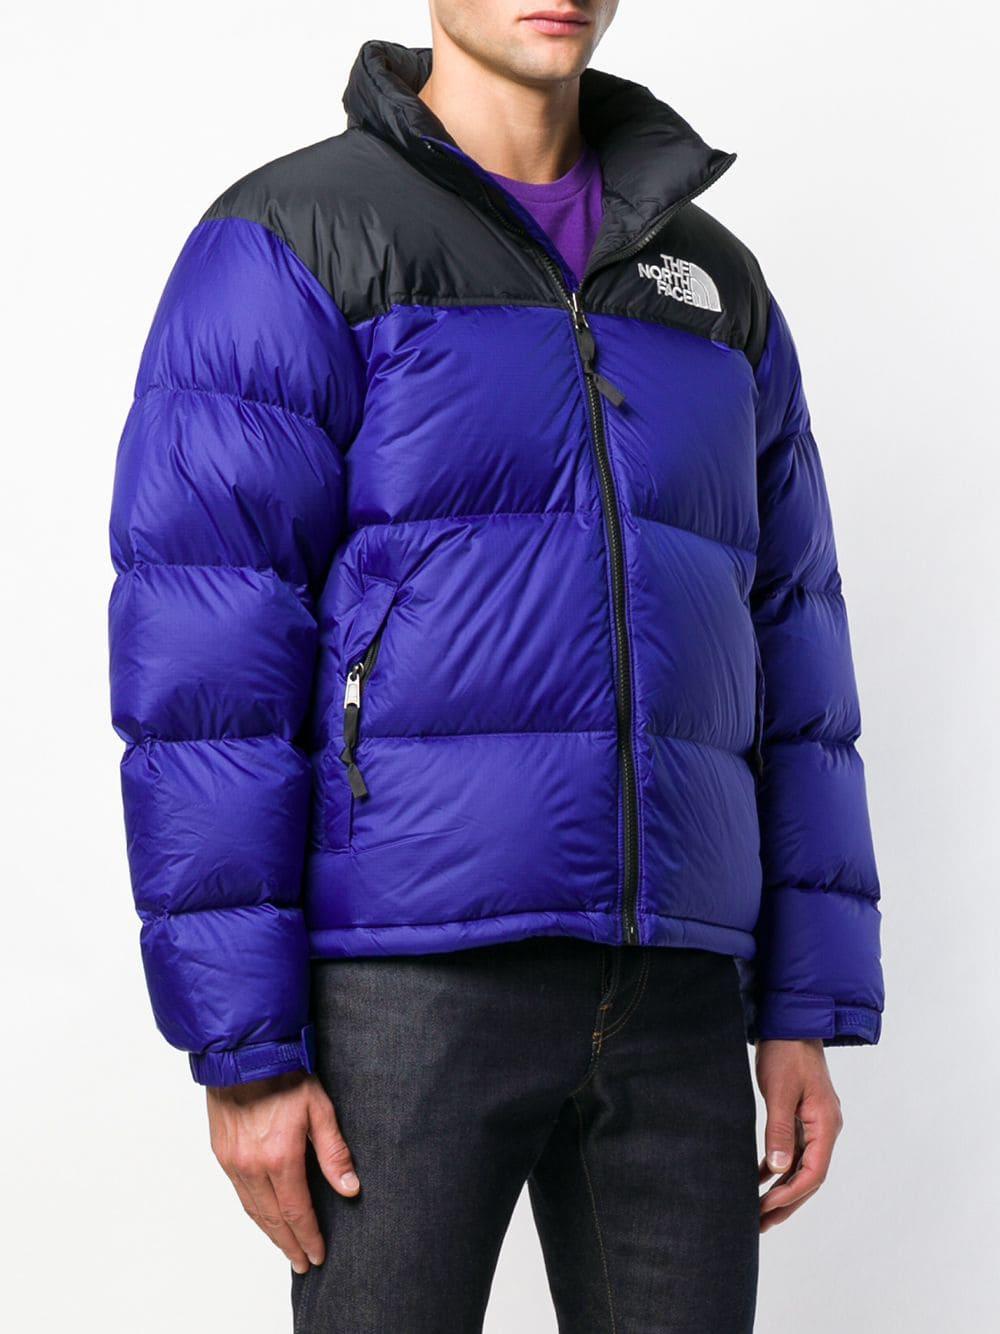 The North Face Synthetic Two-tone Puffer Jacket in Blue for Men - Lyst